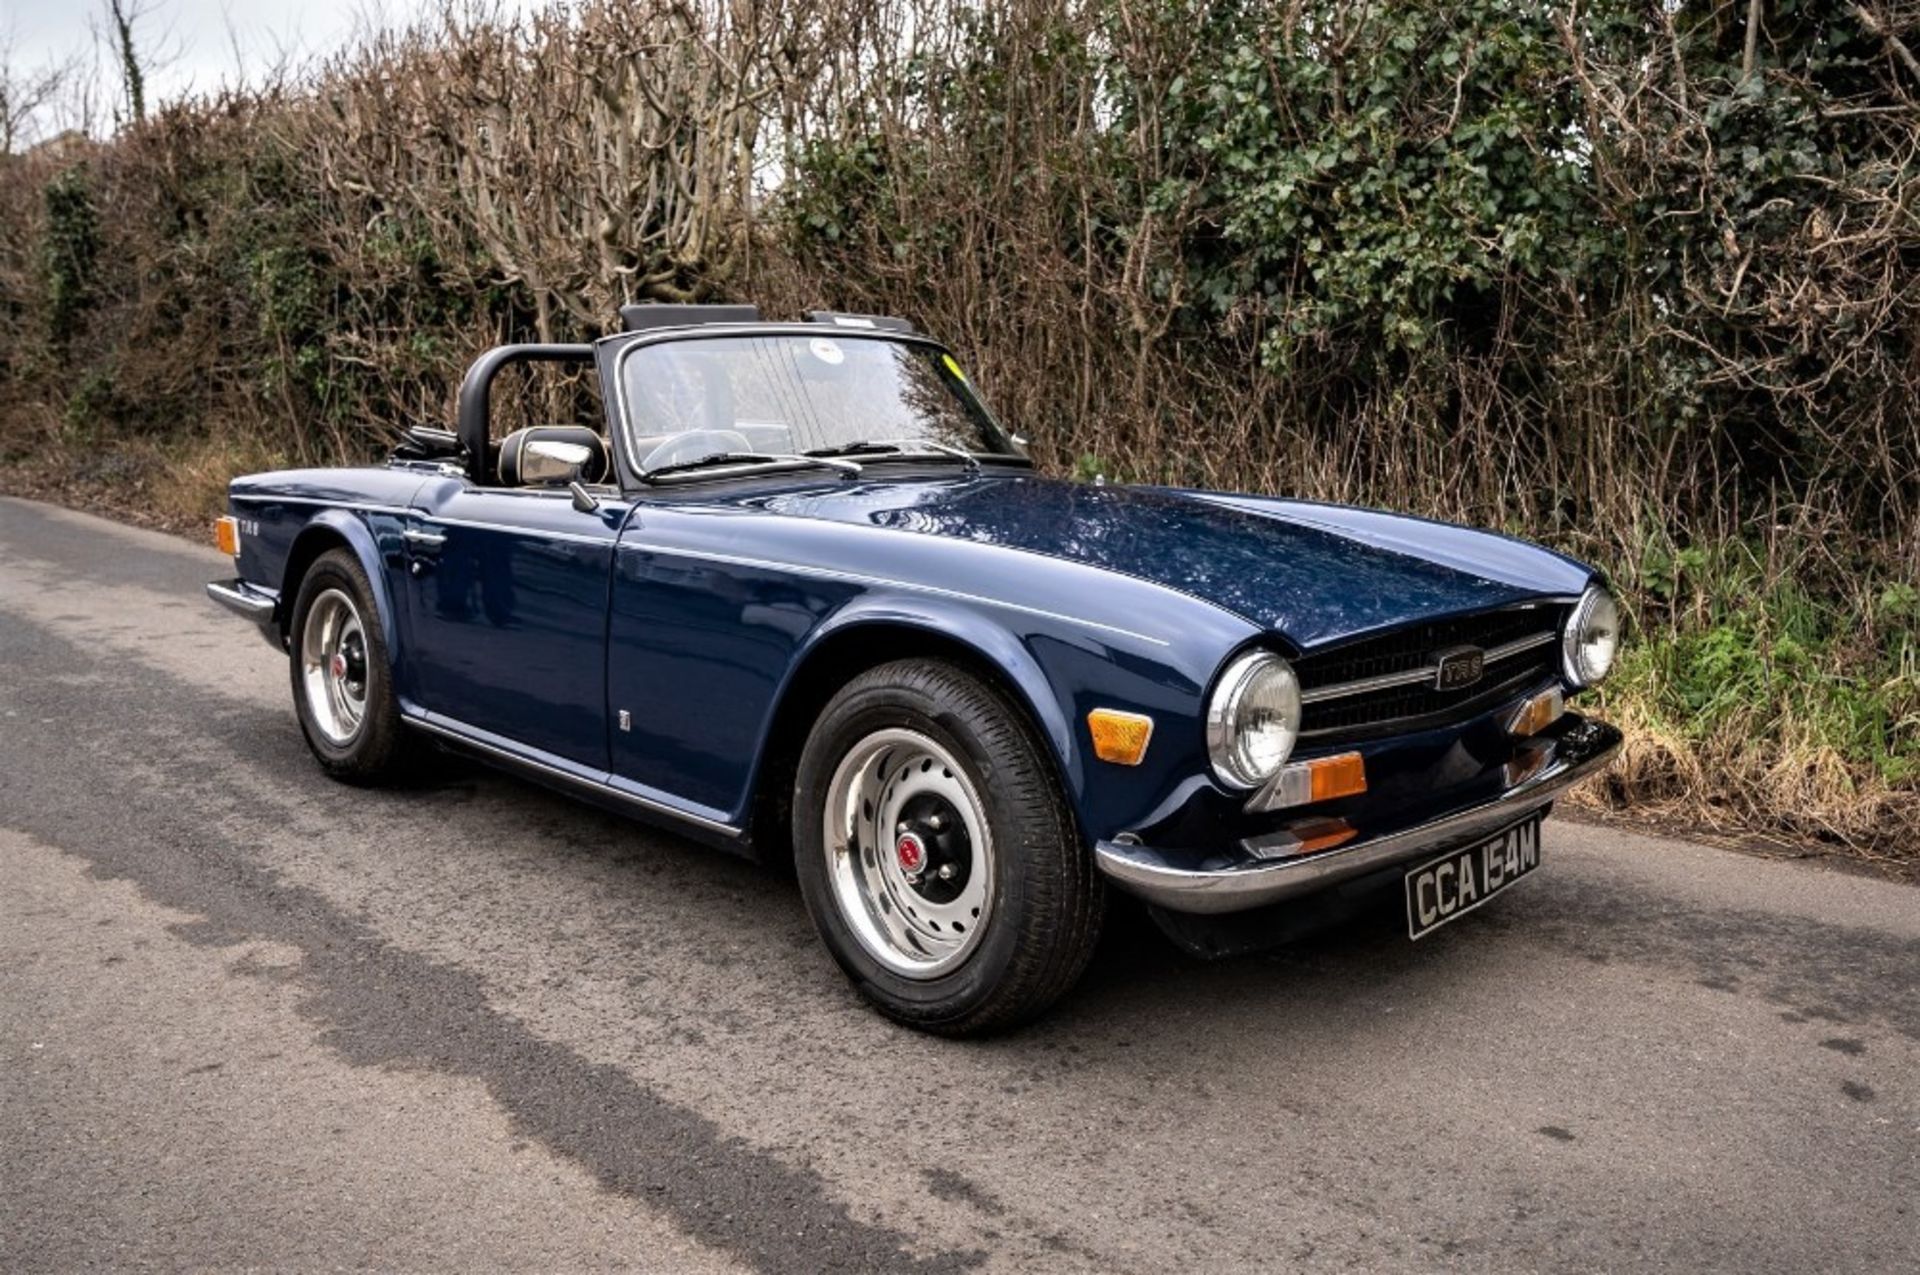 1974 TRIUMPH TR6 Registration Number: CCA 154M Chassis Number: CF21486U Recorded Mileage: c.15,000 - Image 2 of 16